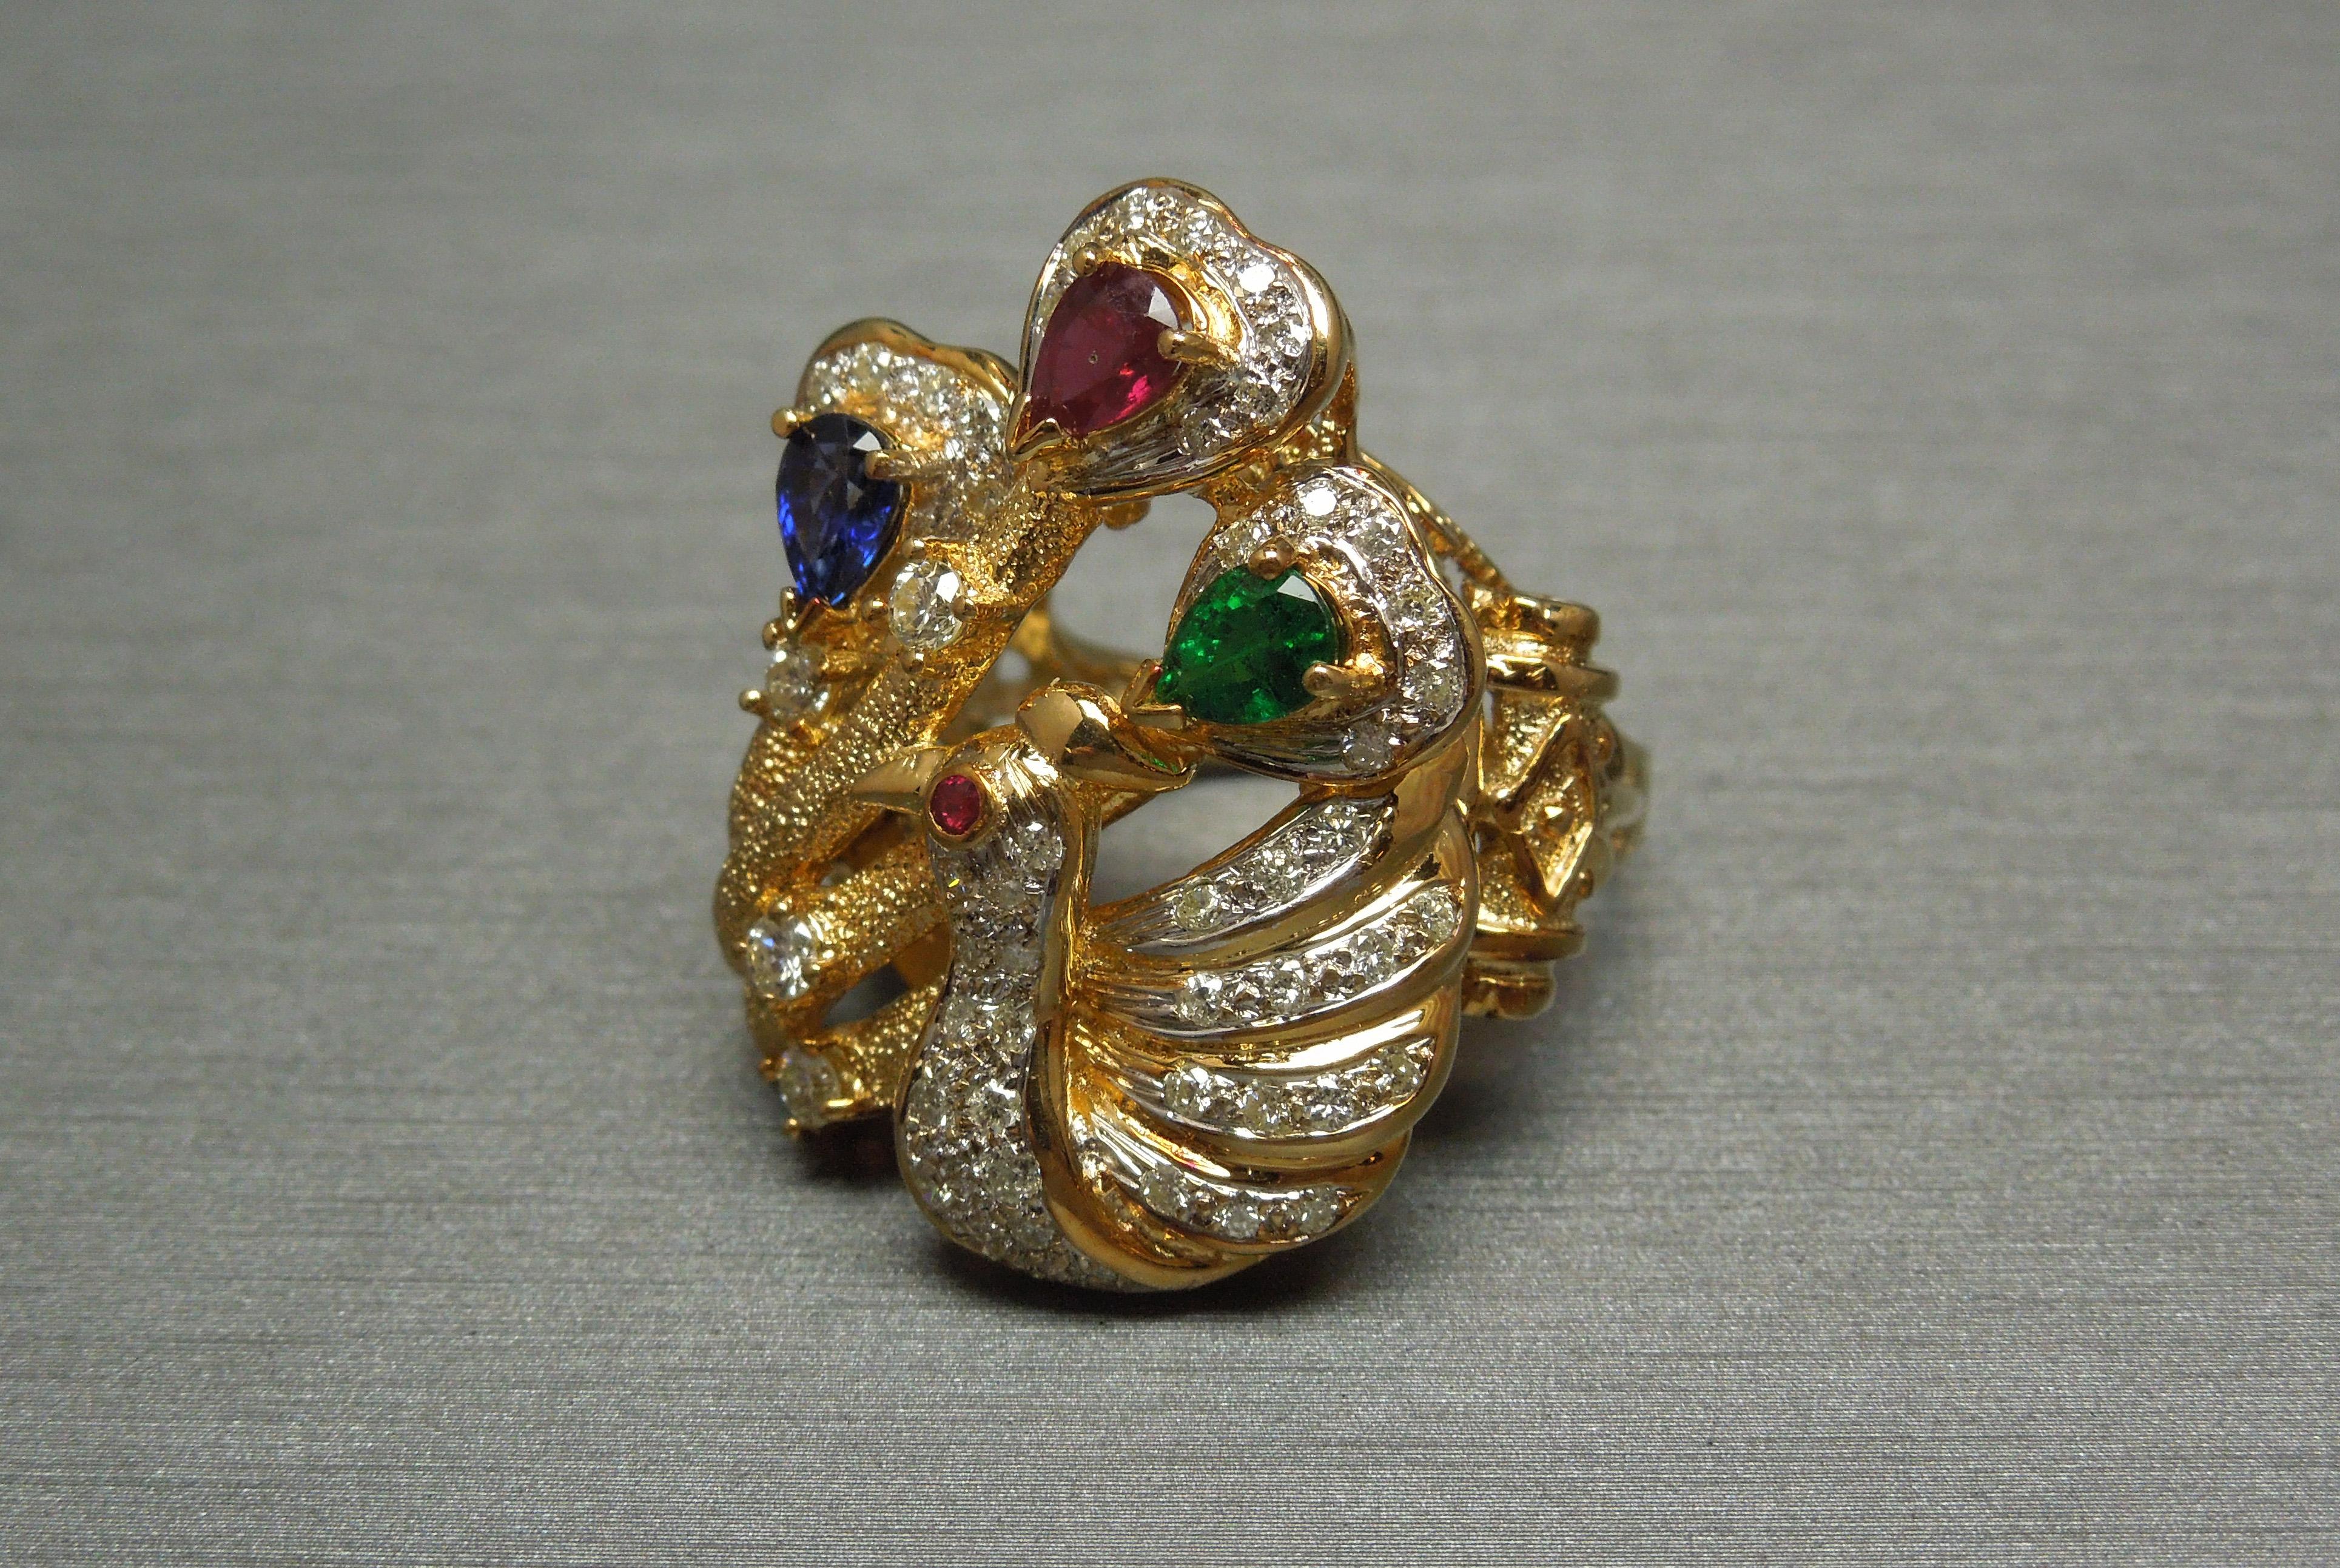 In a combination of 14KT & 18KT Gold, accented with exceptionally detailed Hand Engraving throughout. Featuring 3 Central Pear cut Brilliant Precious Gemstones - Ruby, Emerald, & Kashmir Sapphire - totaling 1.50 carats, each secured in three prongs.